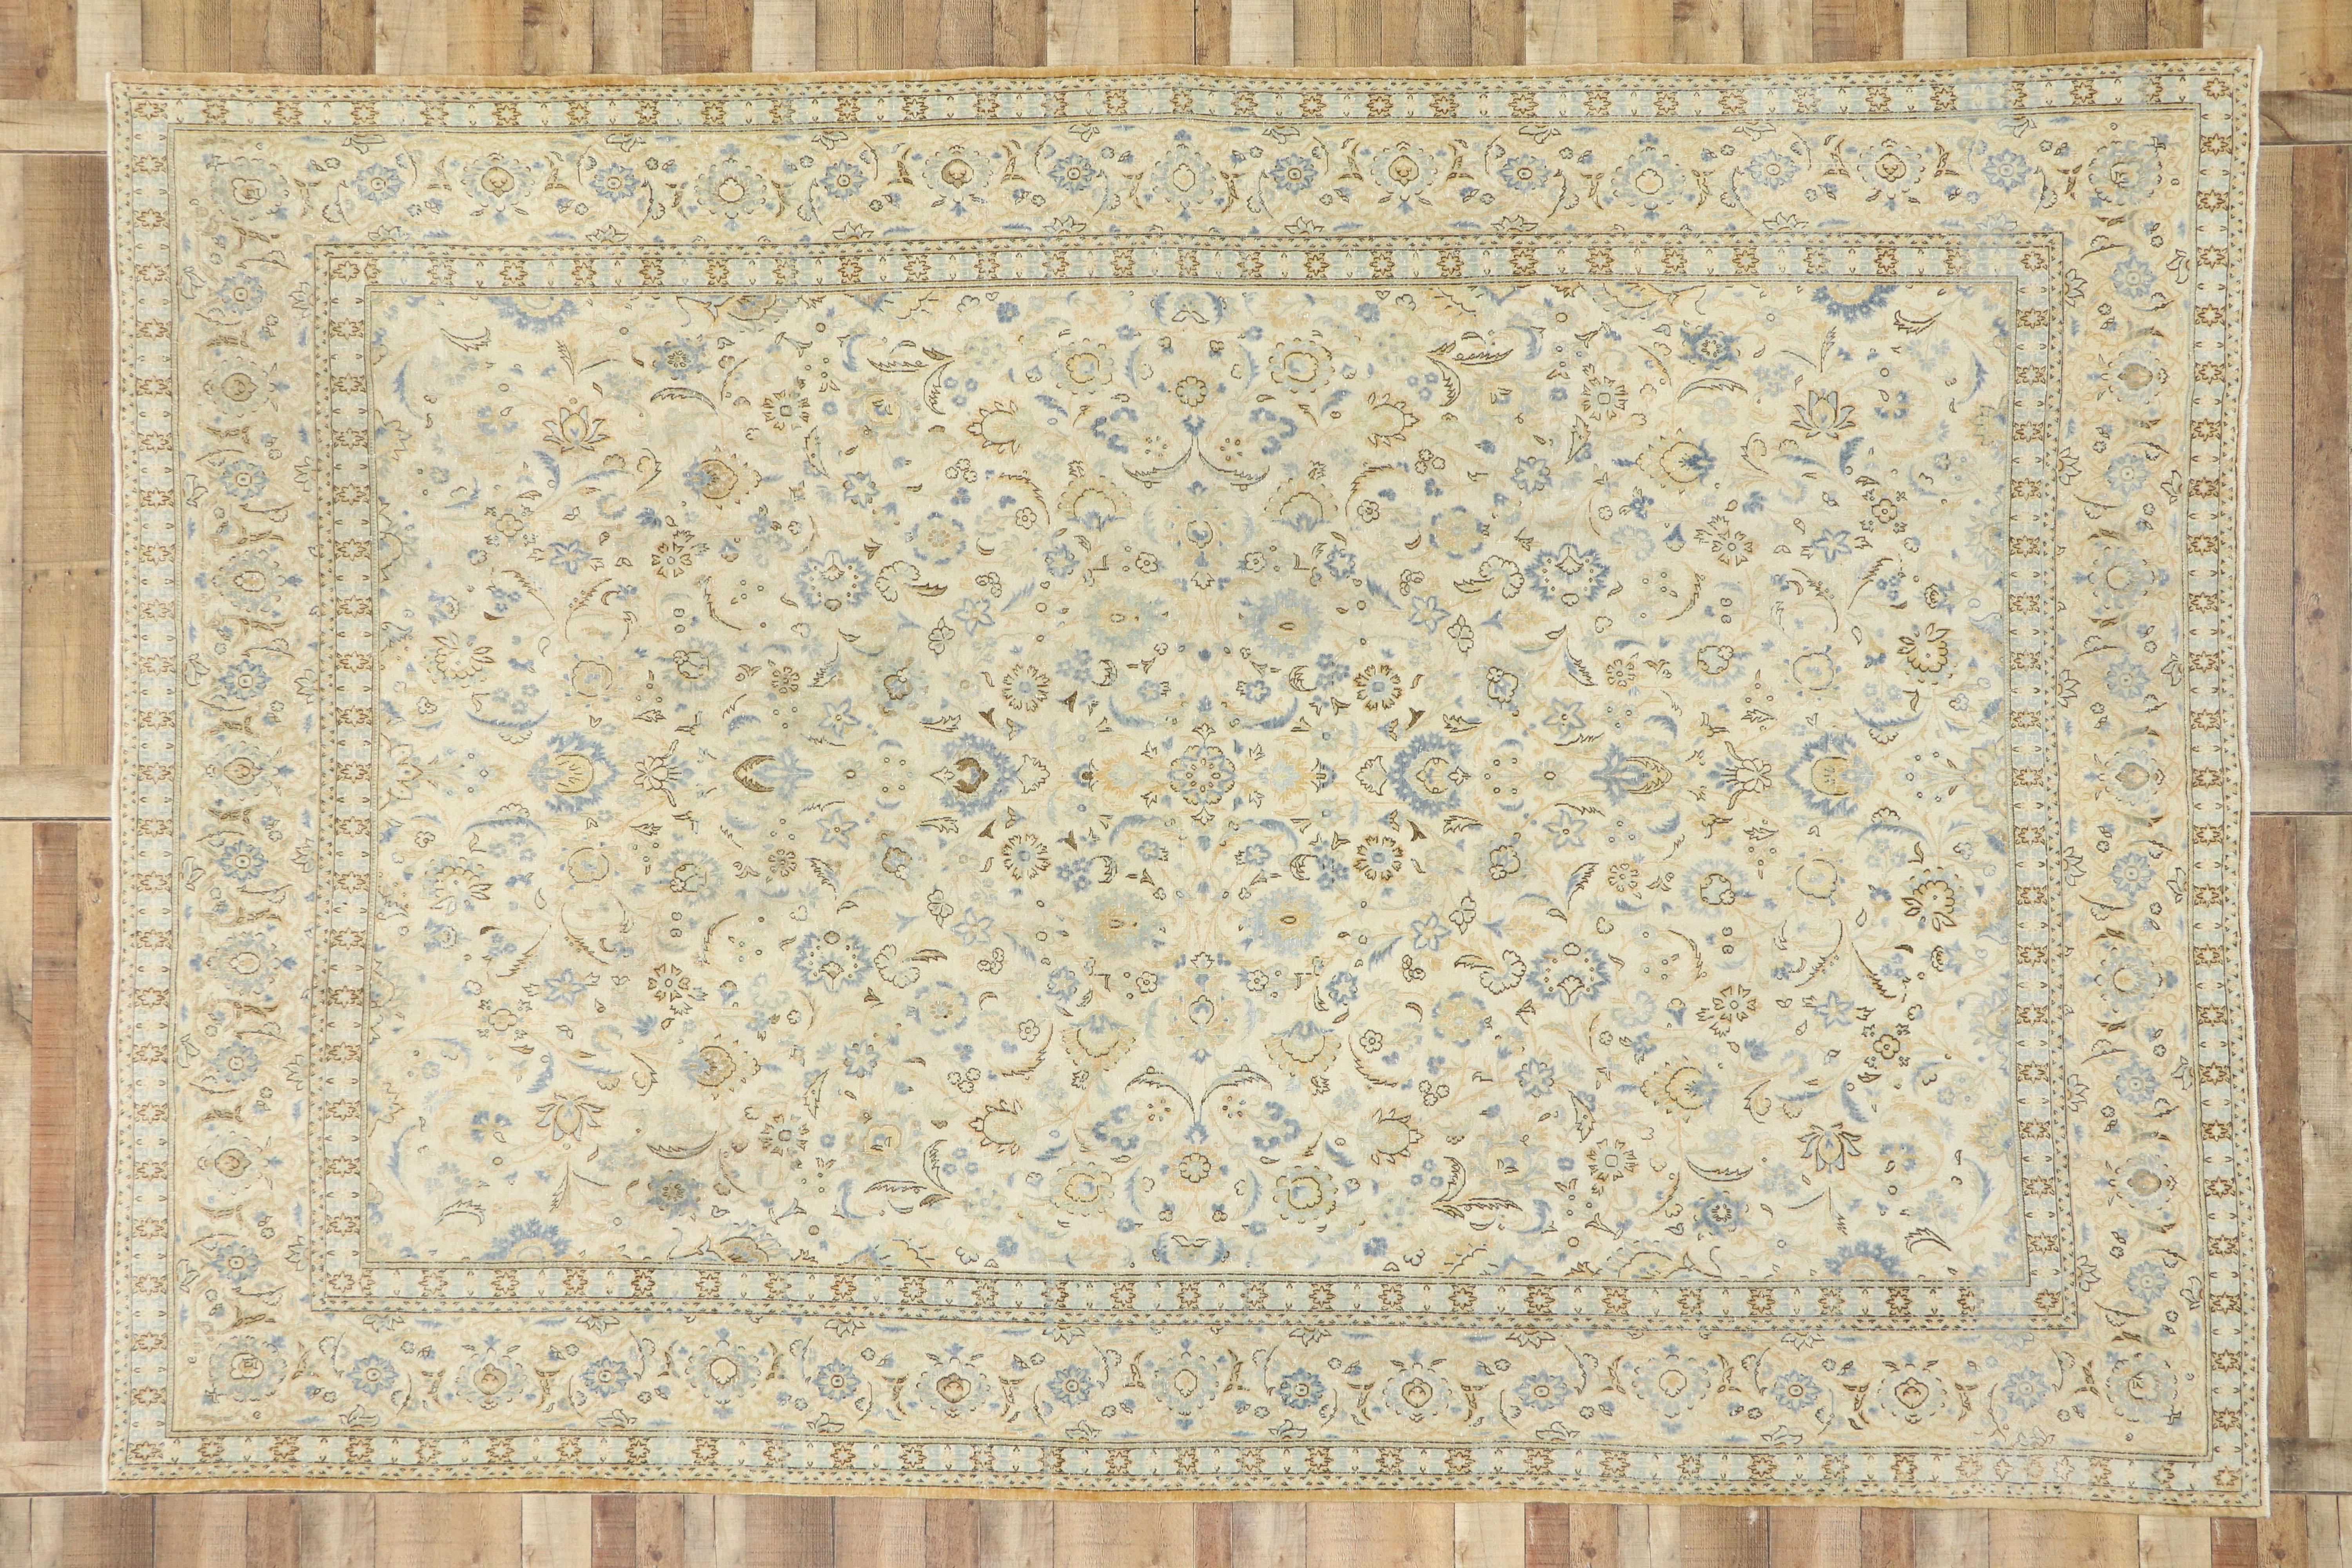 Wool Distressed Antique Persian Kashan Rug with Cotswold English Manor Style For Sale